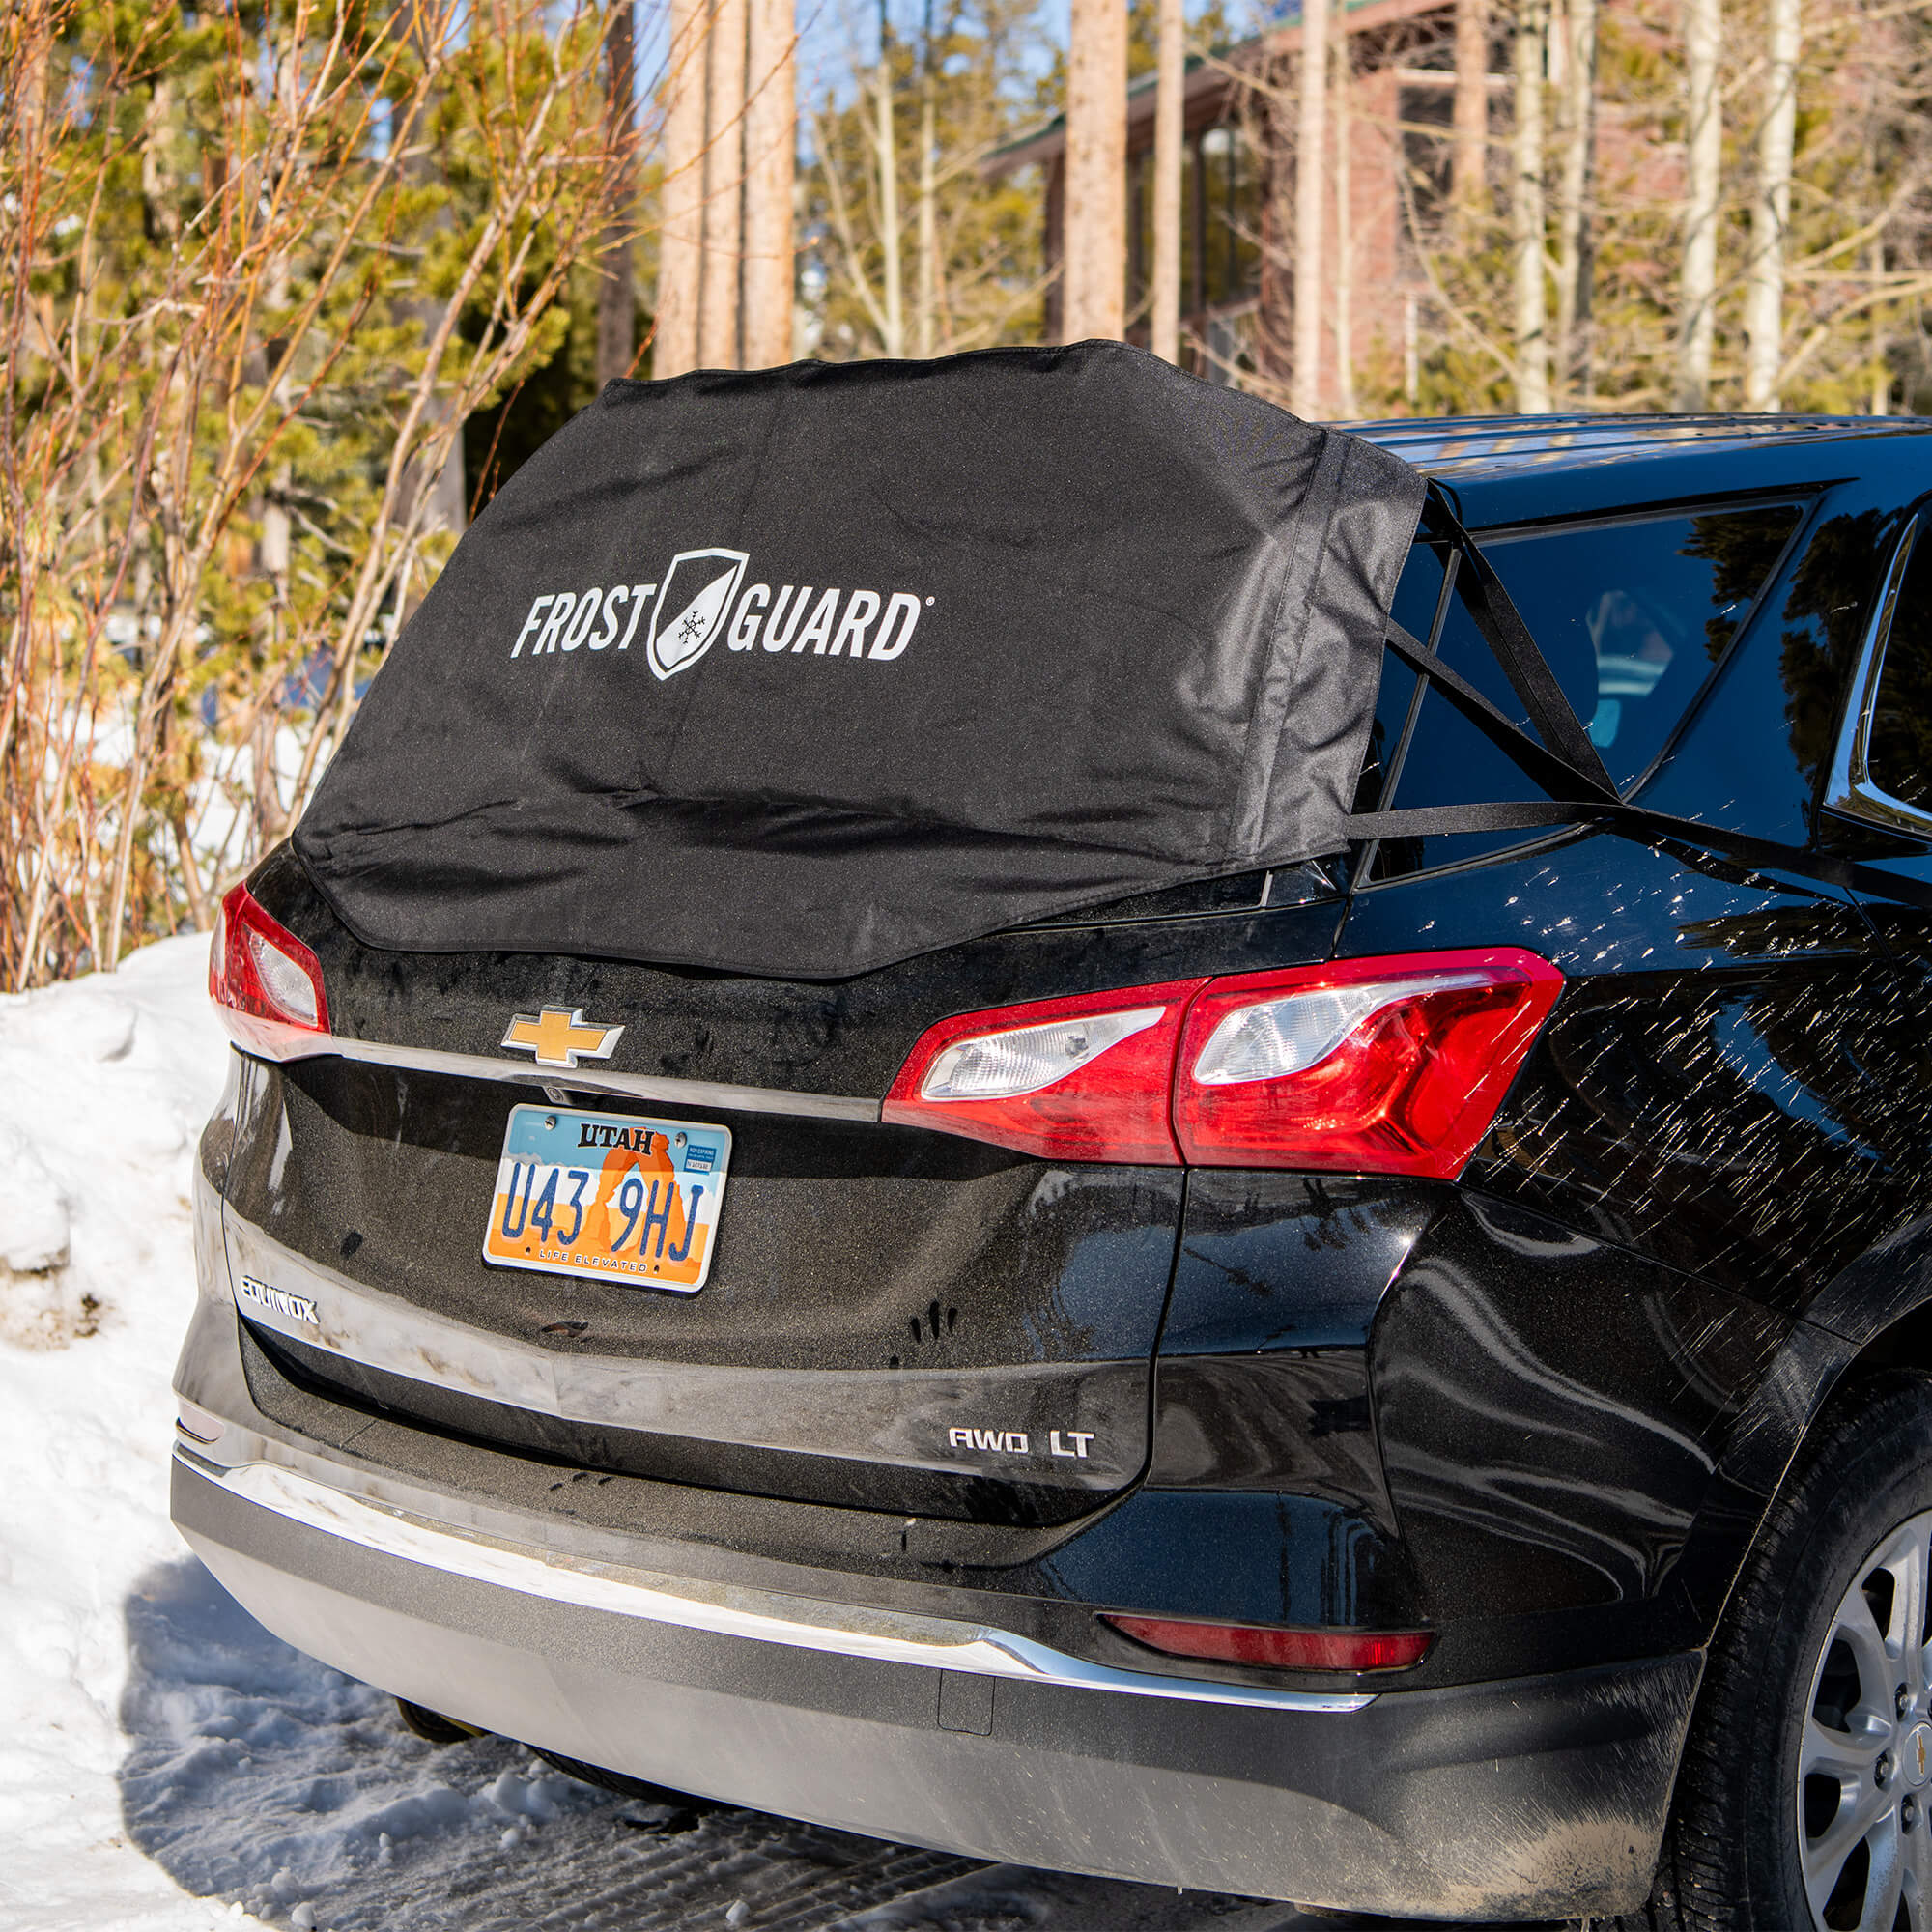 FrostGuard Deluxe Winter Windshield Cover - Urban Transit™